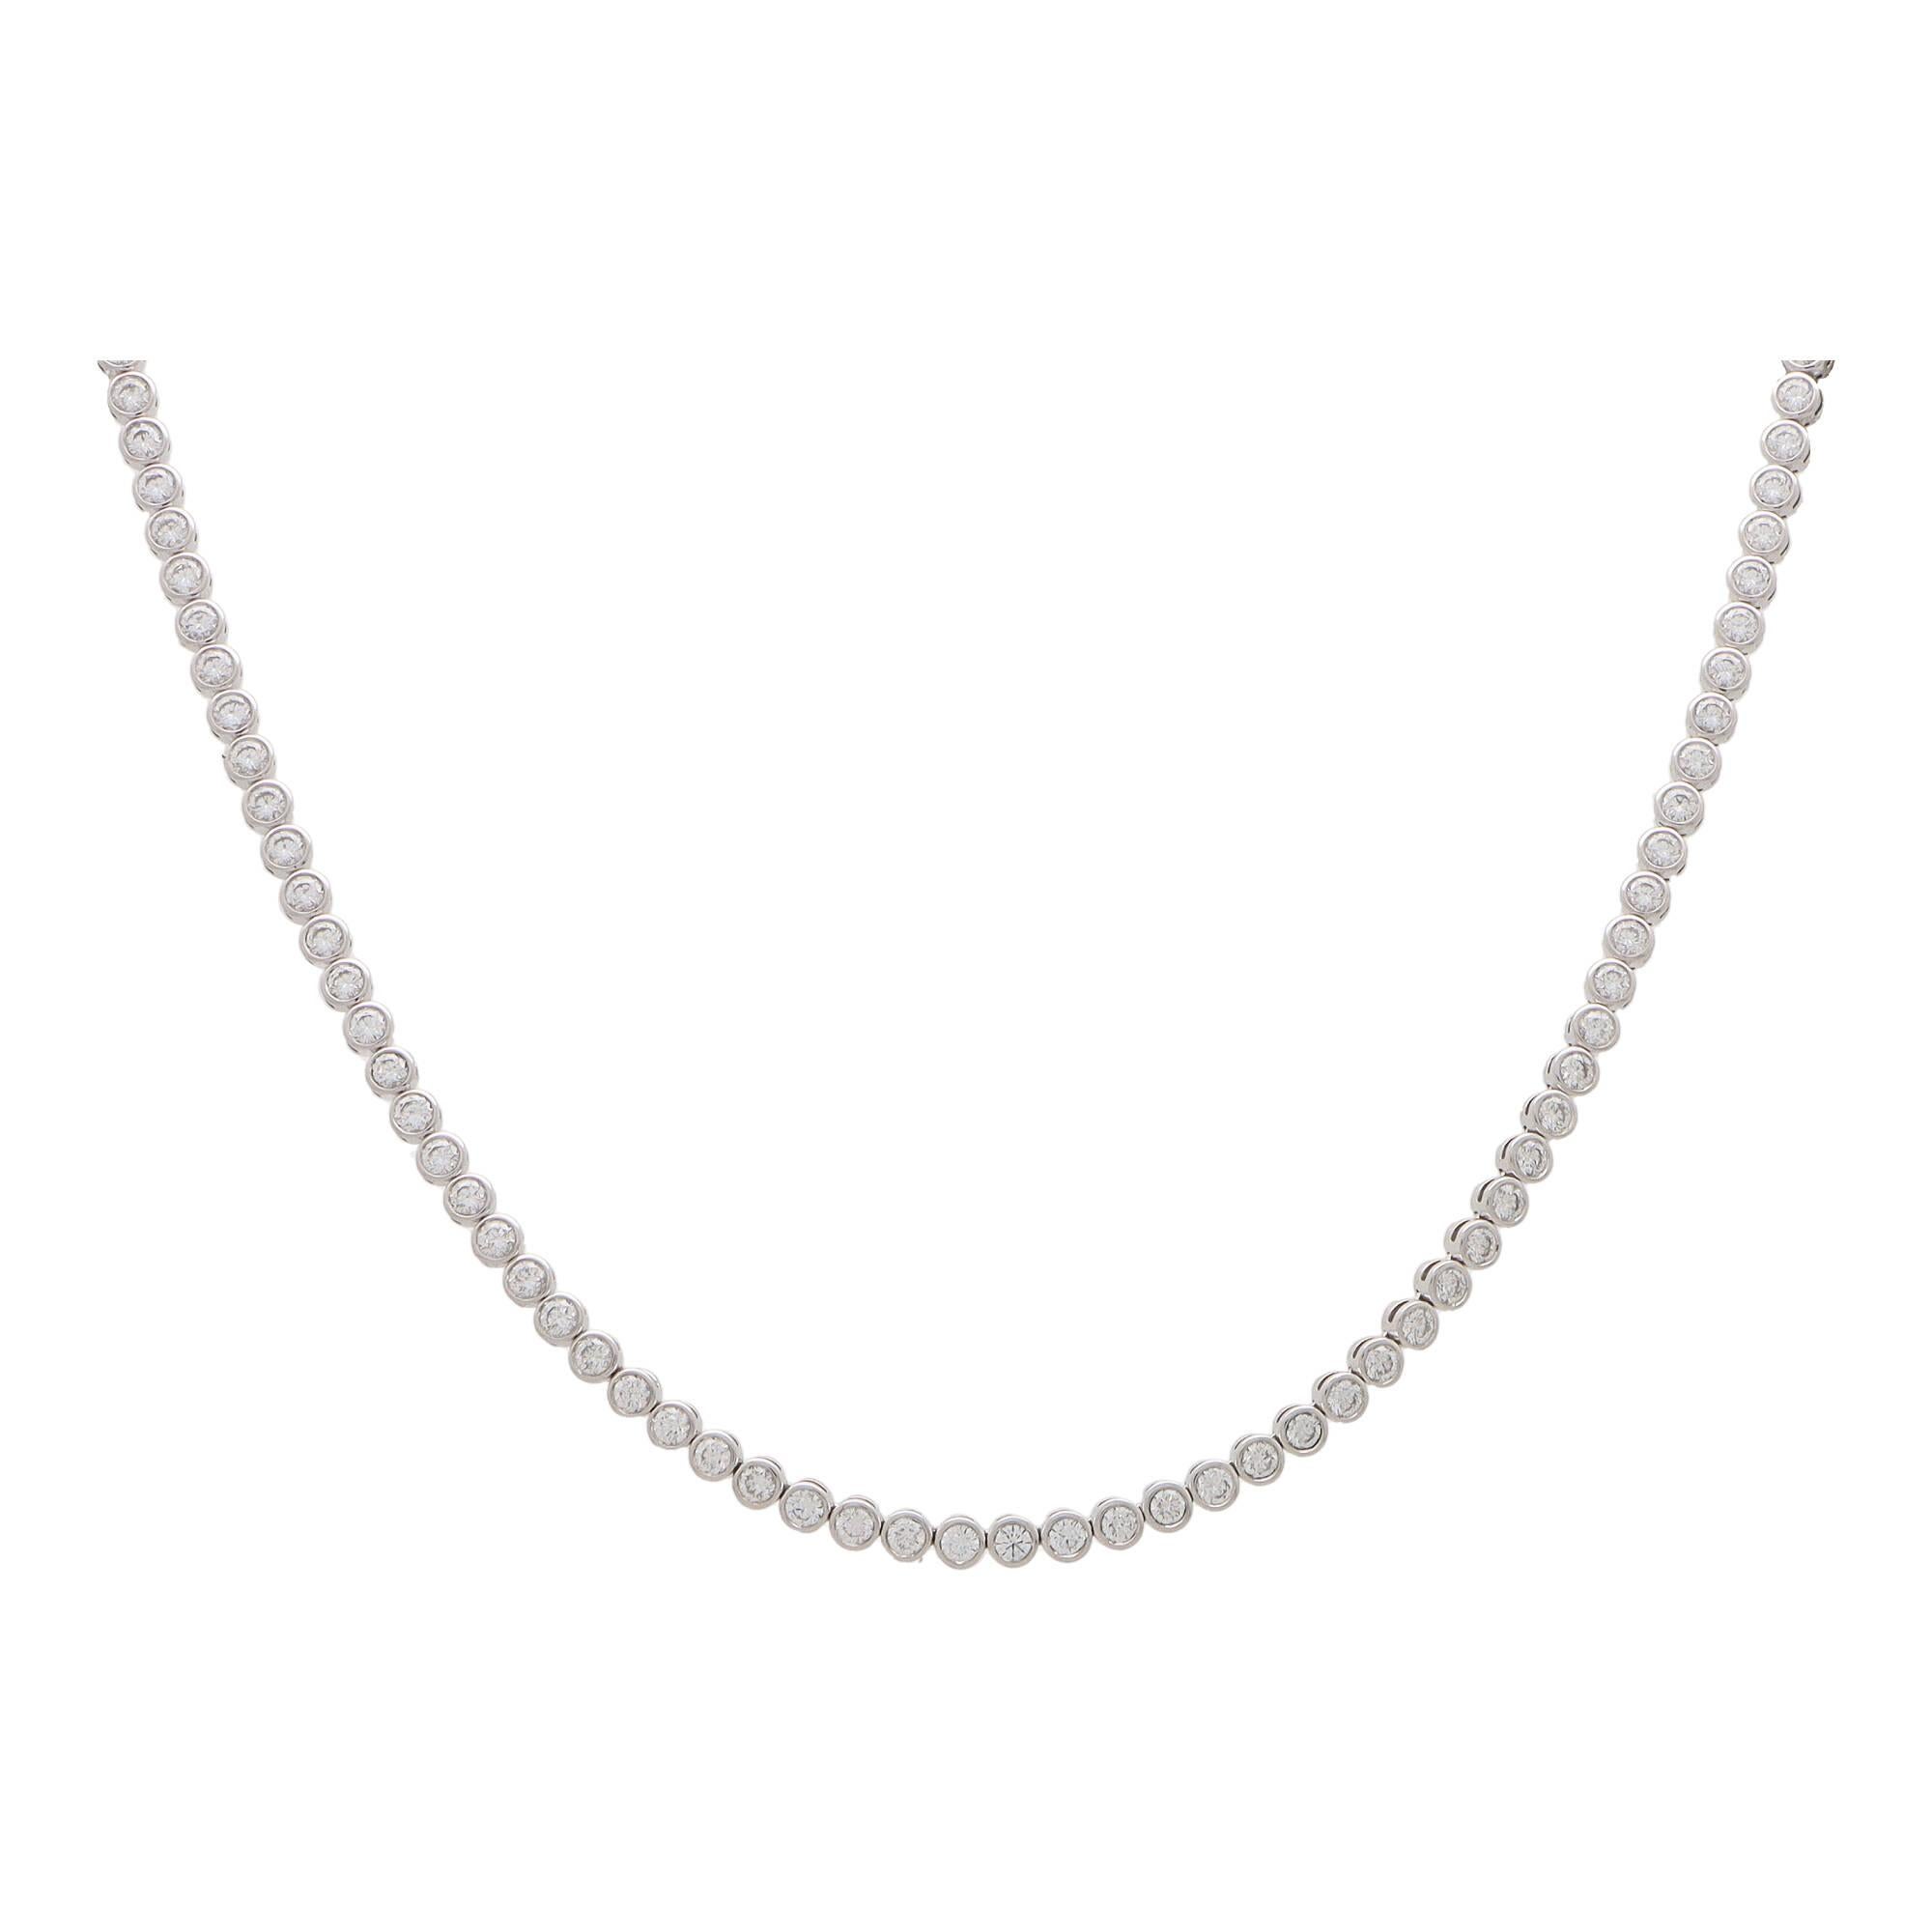 Modern Vintage De Beers Diamond Line Riviere Necklace in 18k White Gold For Sale